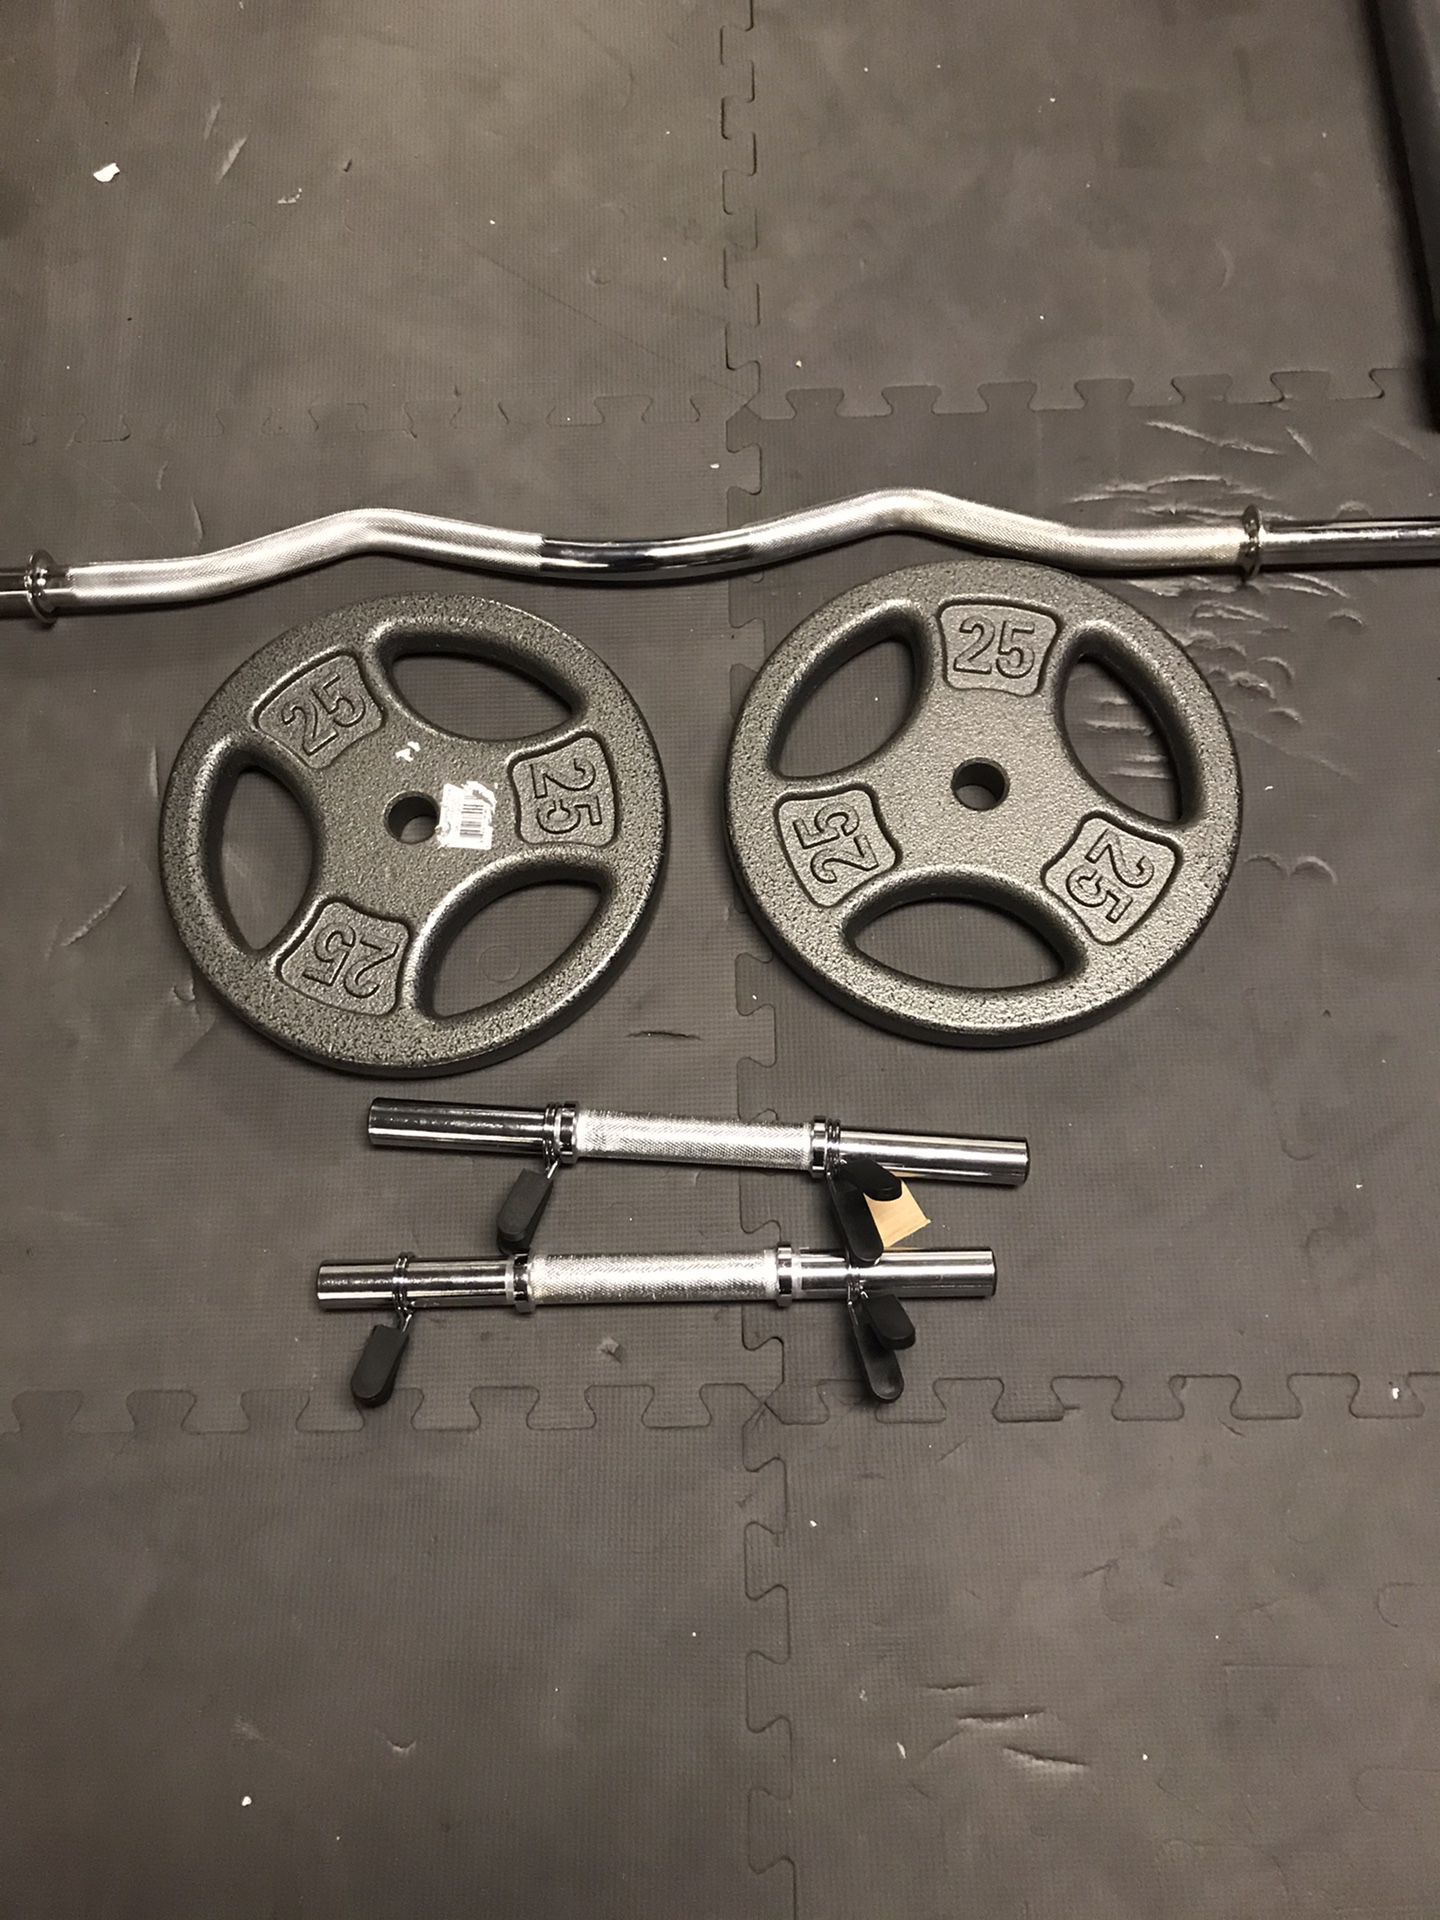 New 2x 25 lb 1 inch plates with dumbbell handles and curl bar